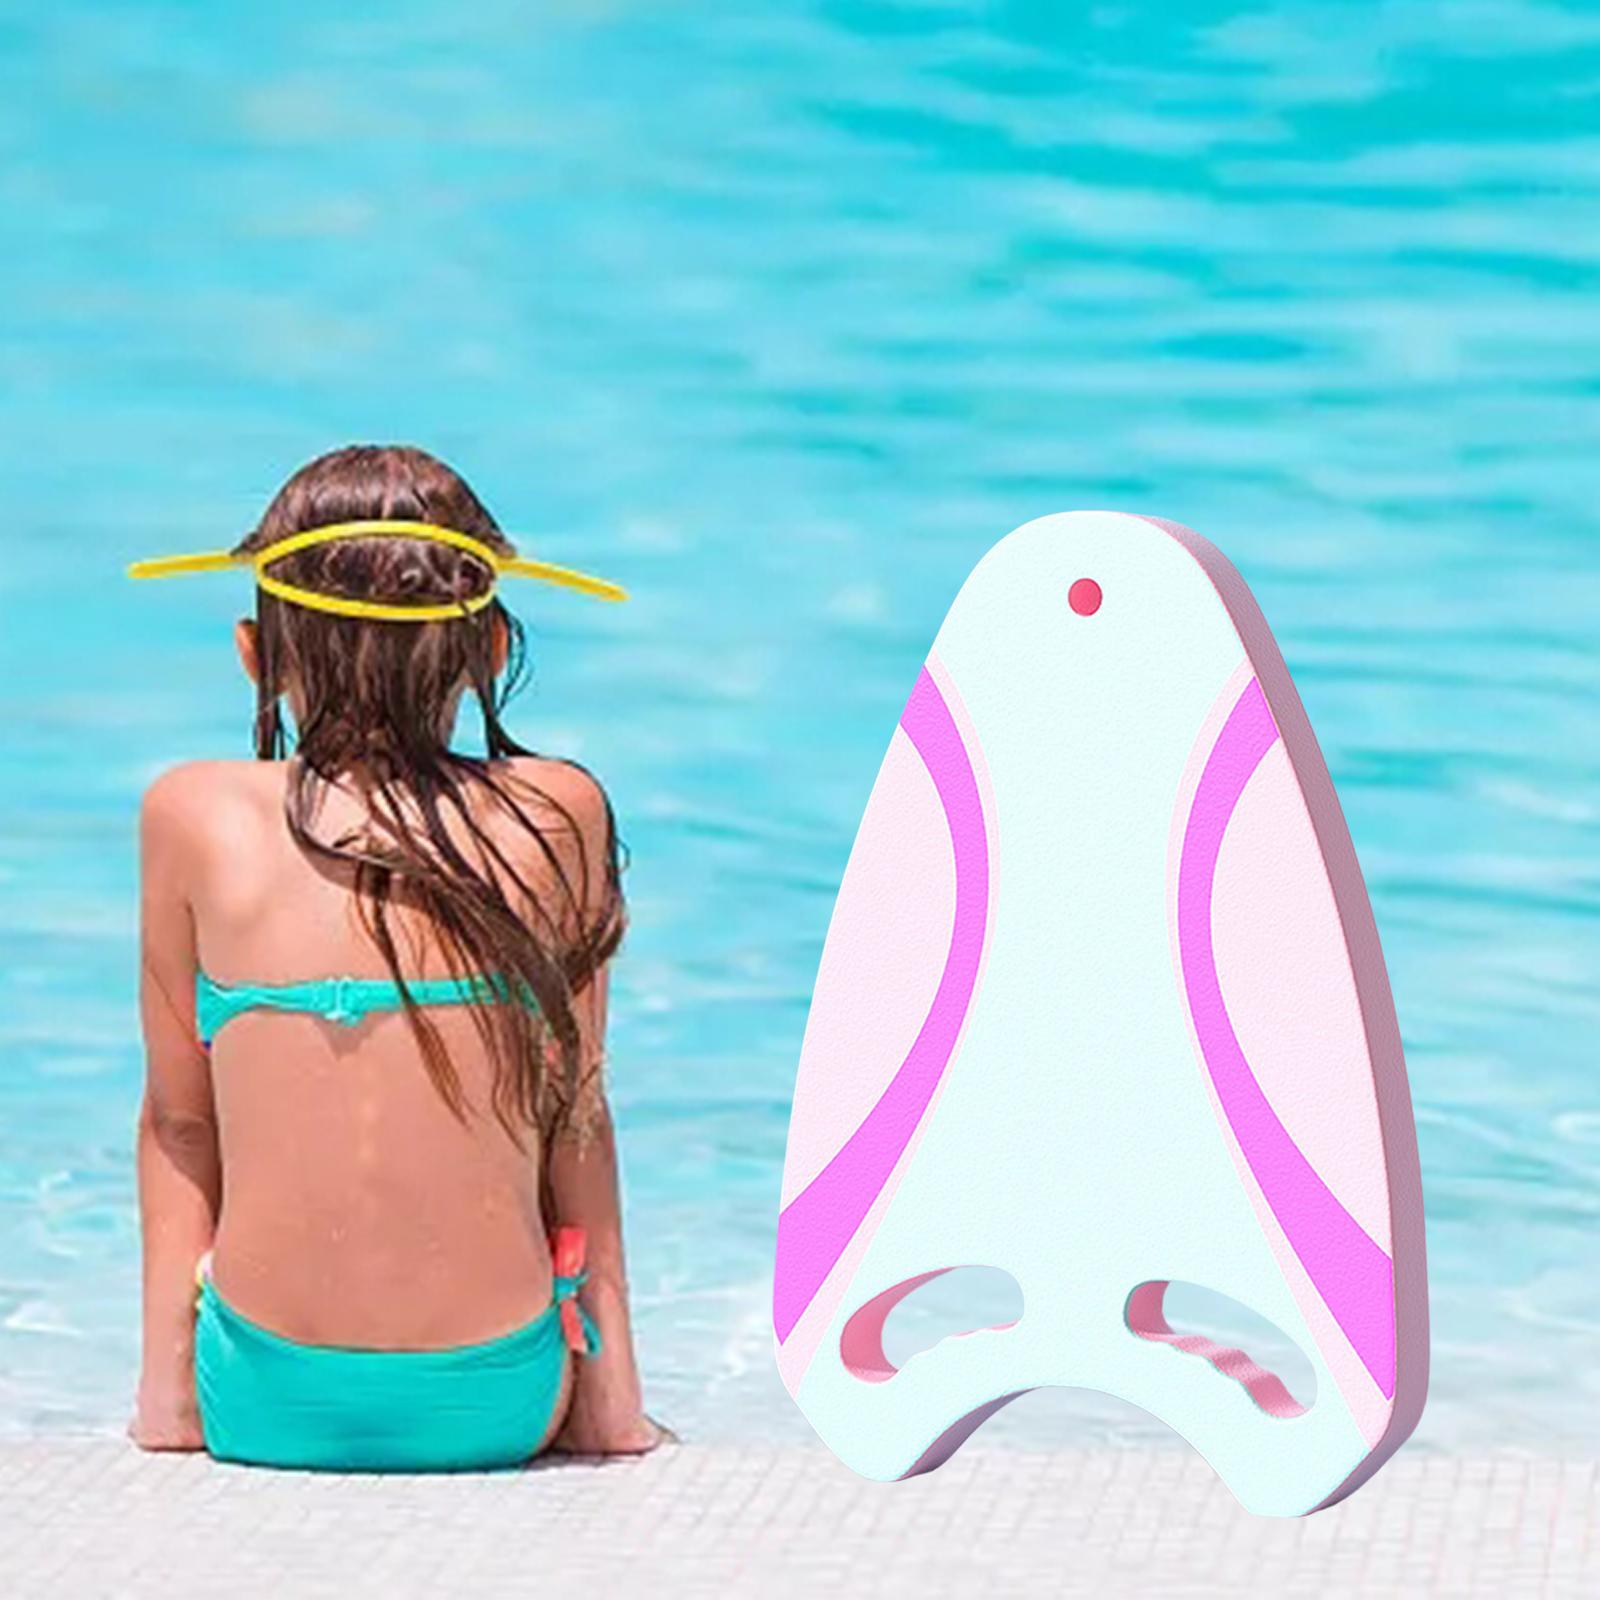 Swimming Kickboard Training Aid Surfing Pool Floats Youth Outdoor Swim Board Pink and Light Blue